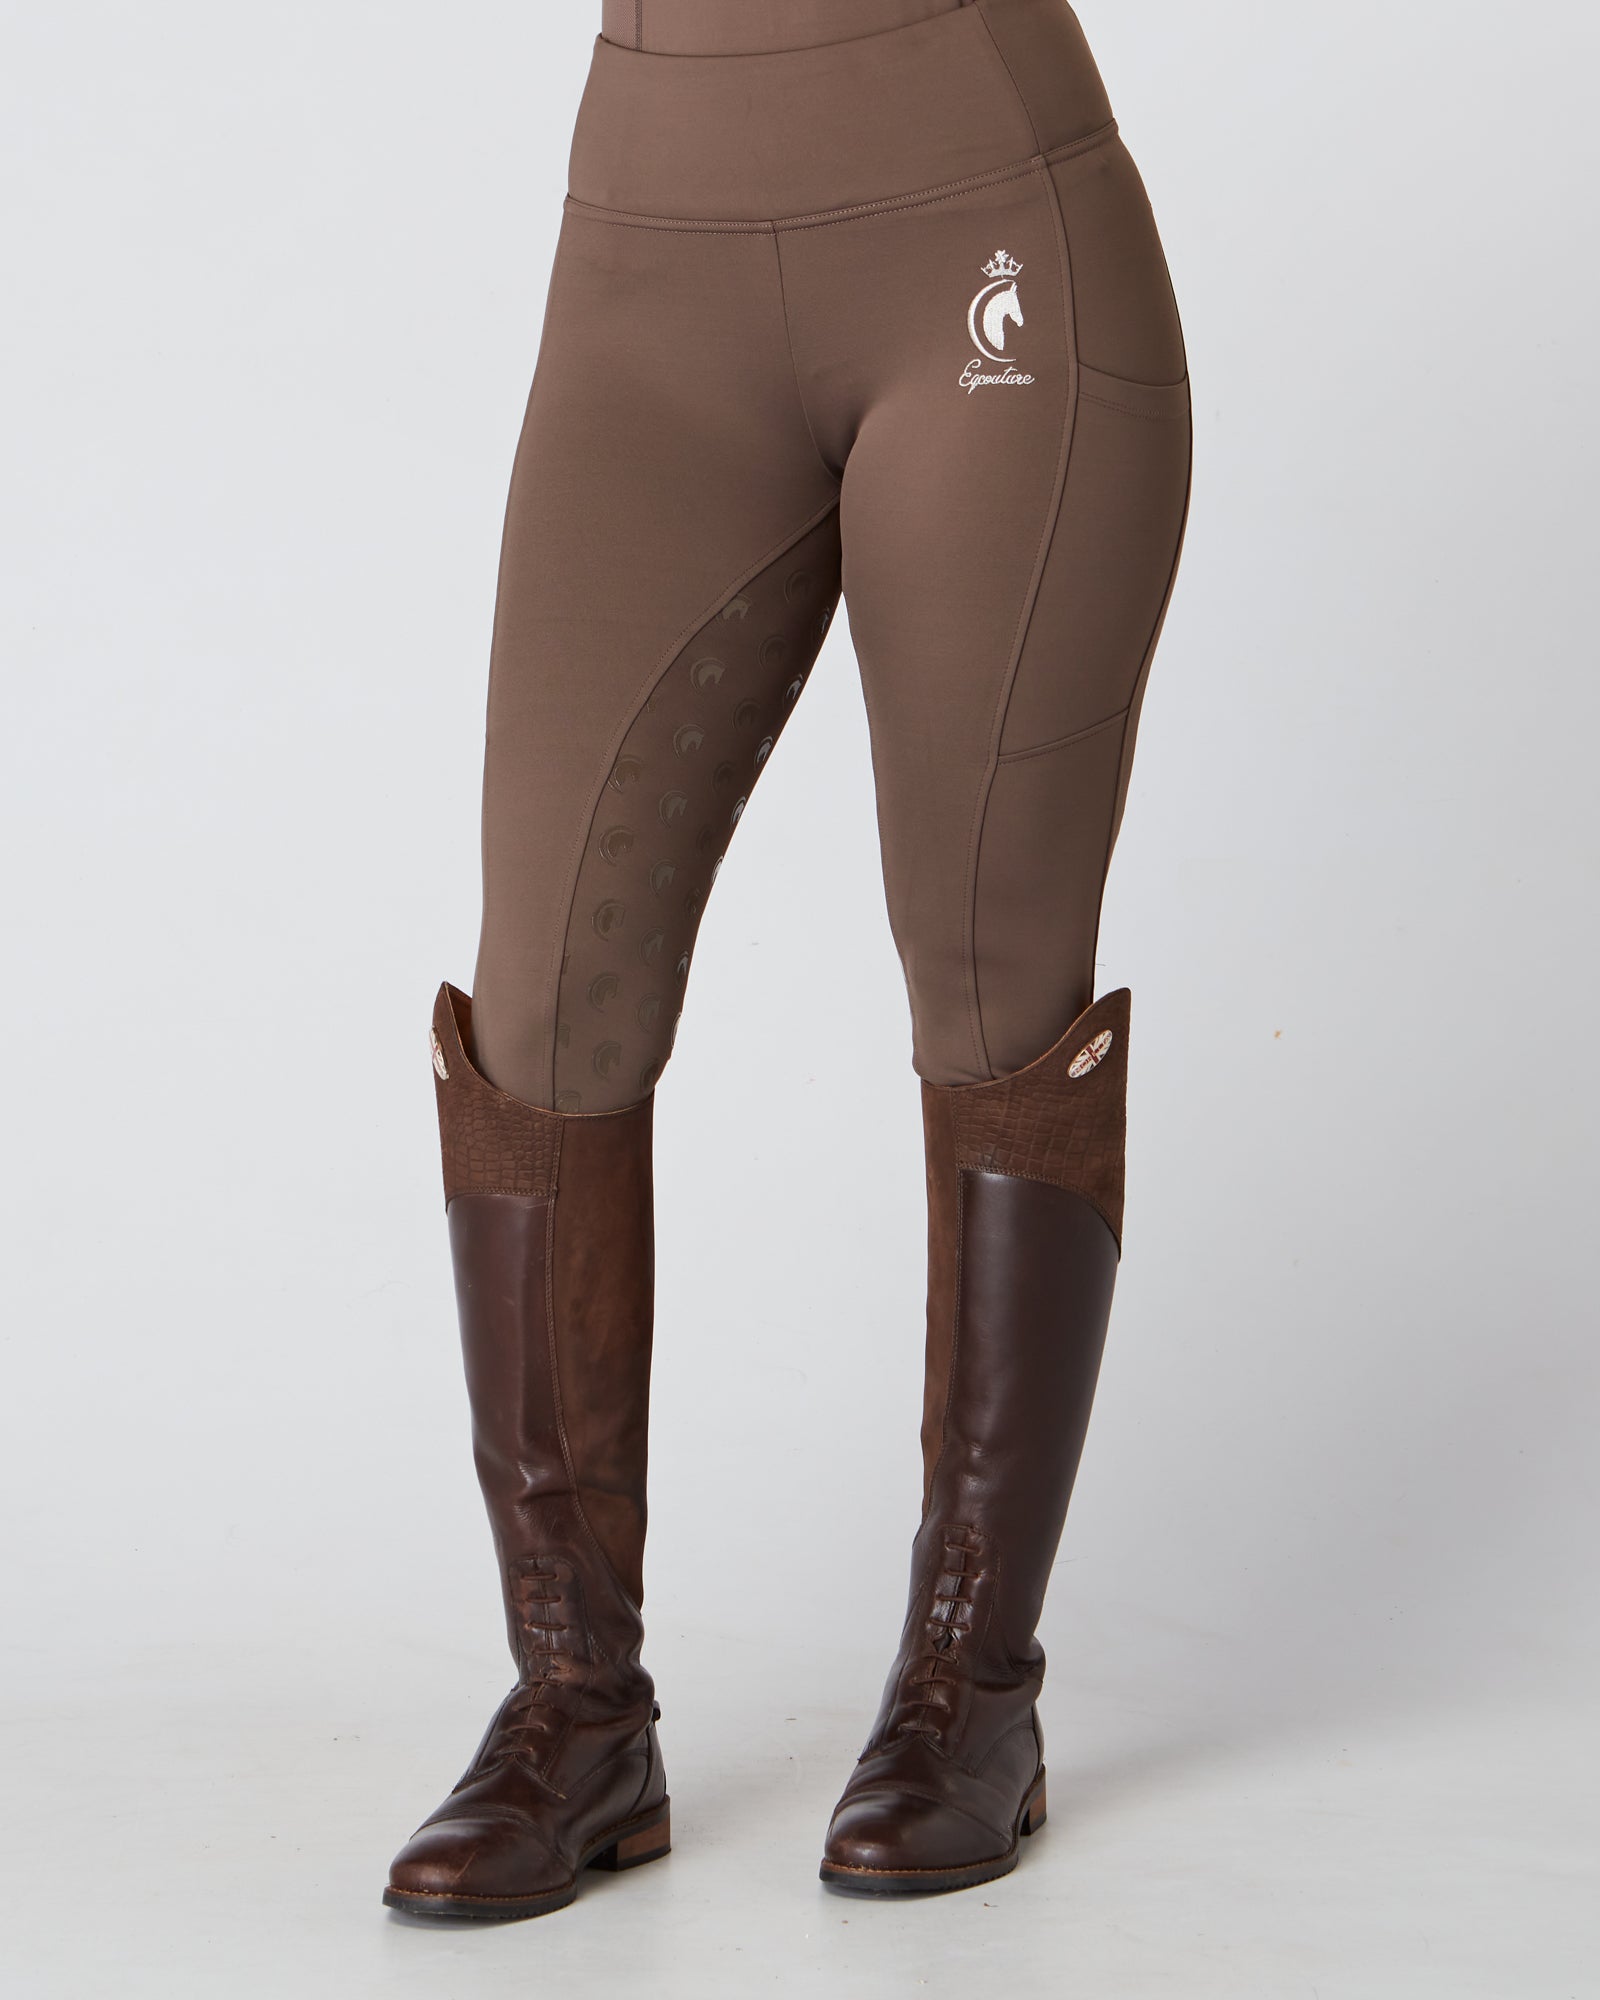 Horse Riding Leggings tights with phone pockets & full seat grip - brown- Eqcouture